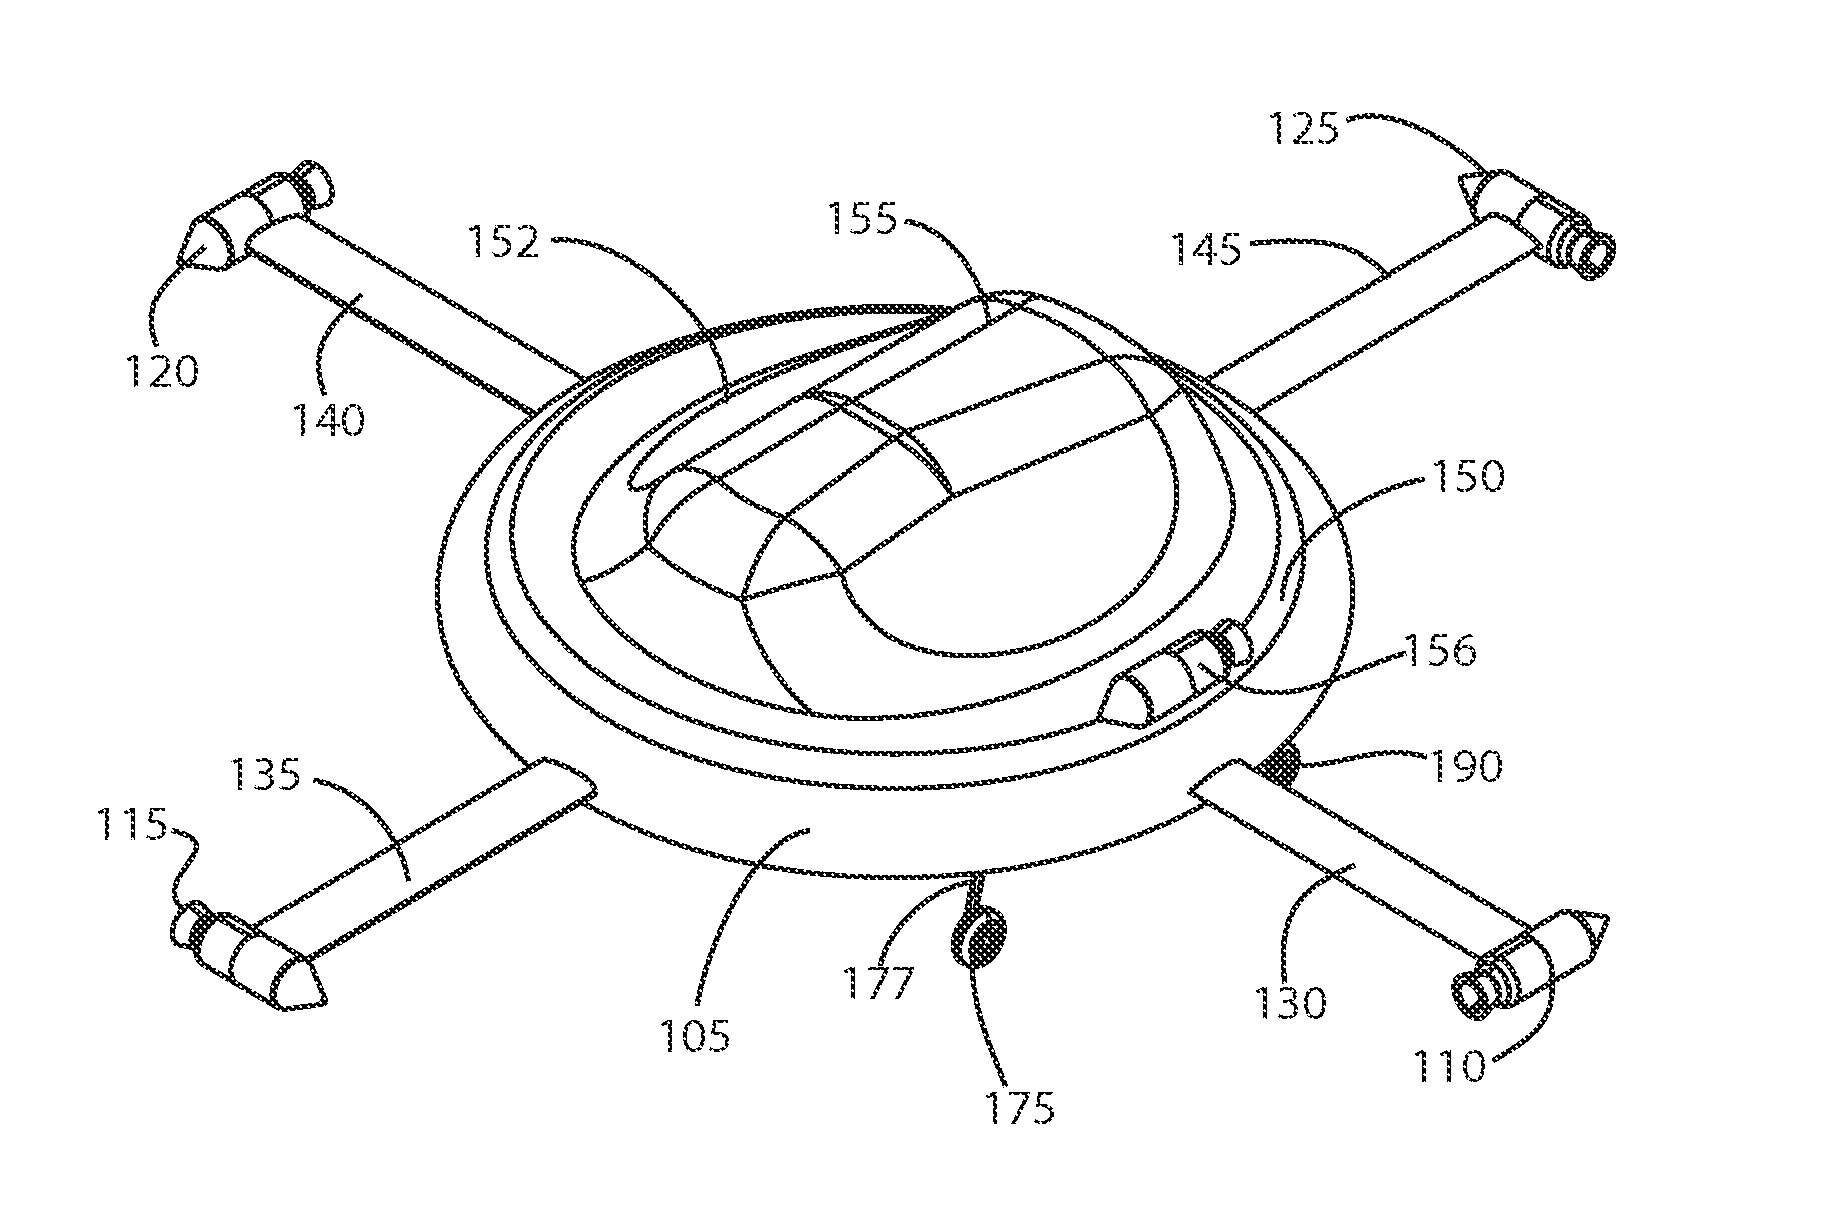 Helicopter with blade-tip thrusters and annular centrifugal fuel supply tank and concentric cabin and fuselage